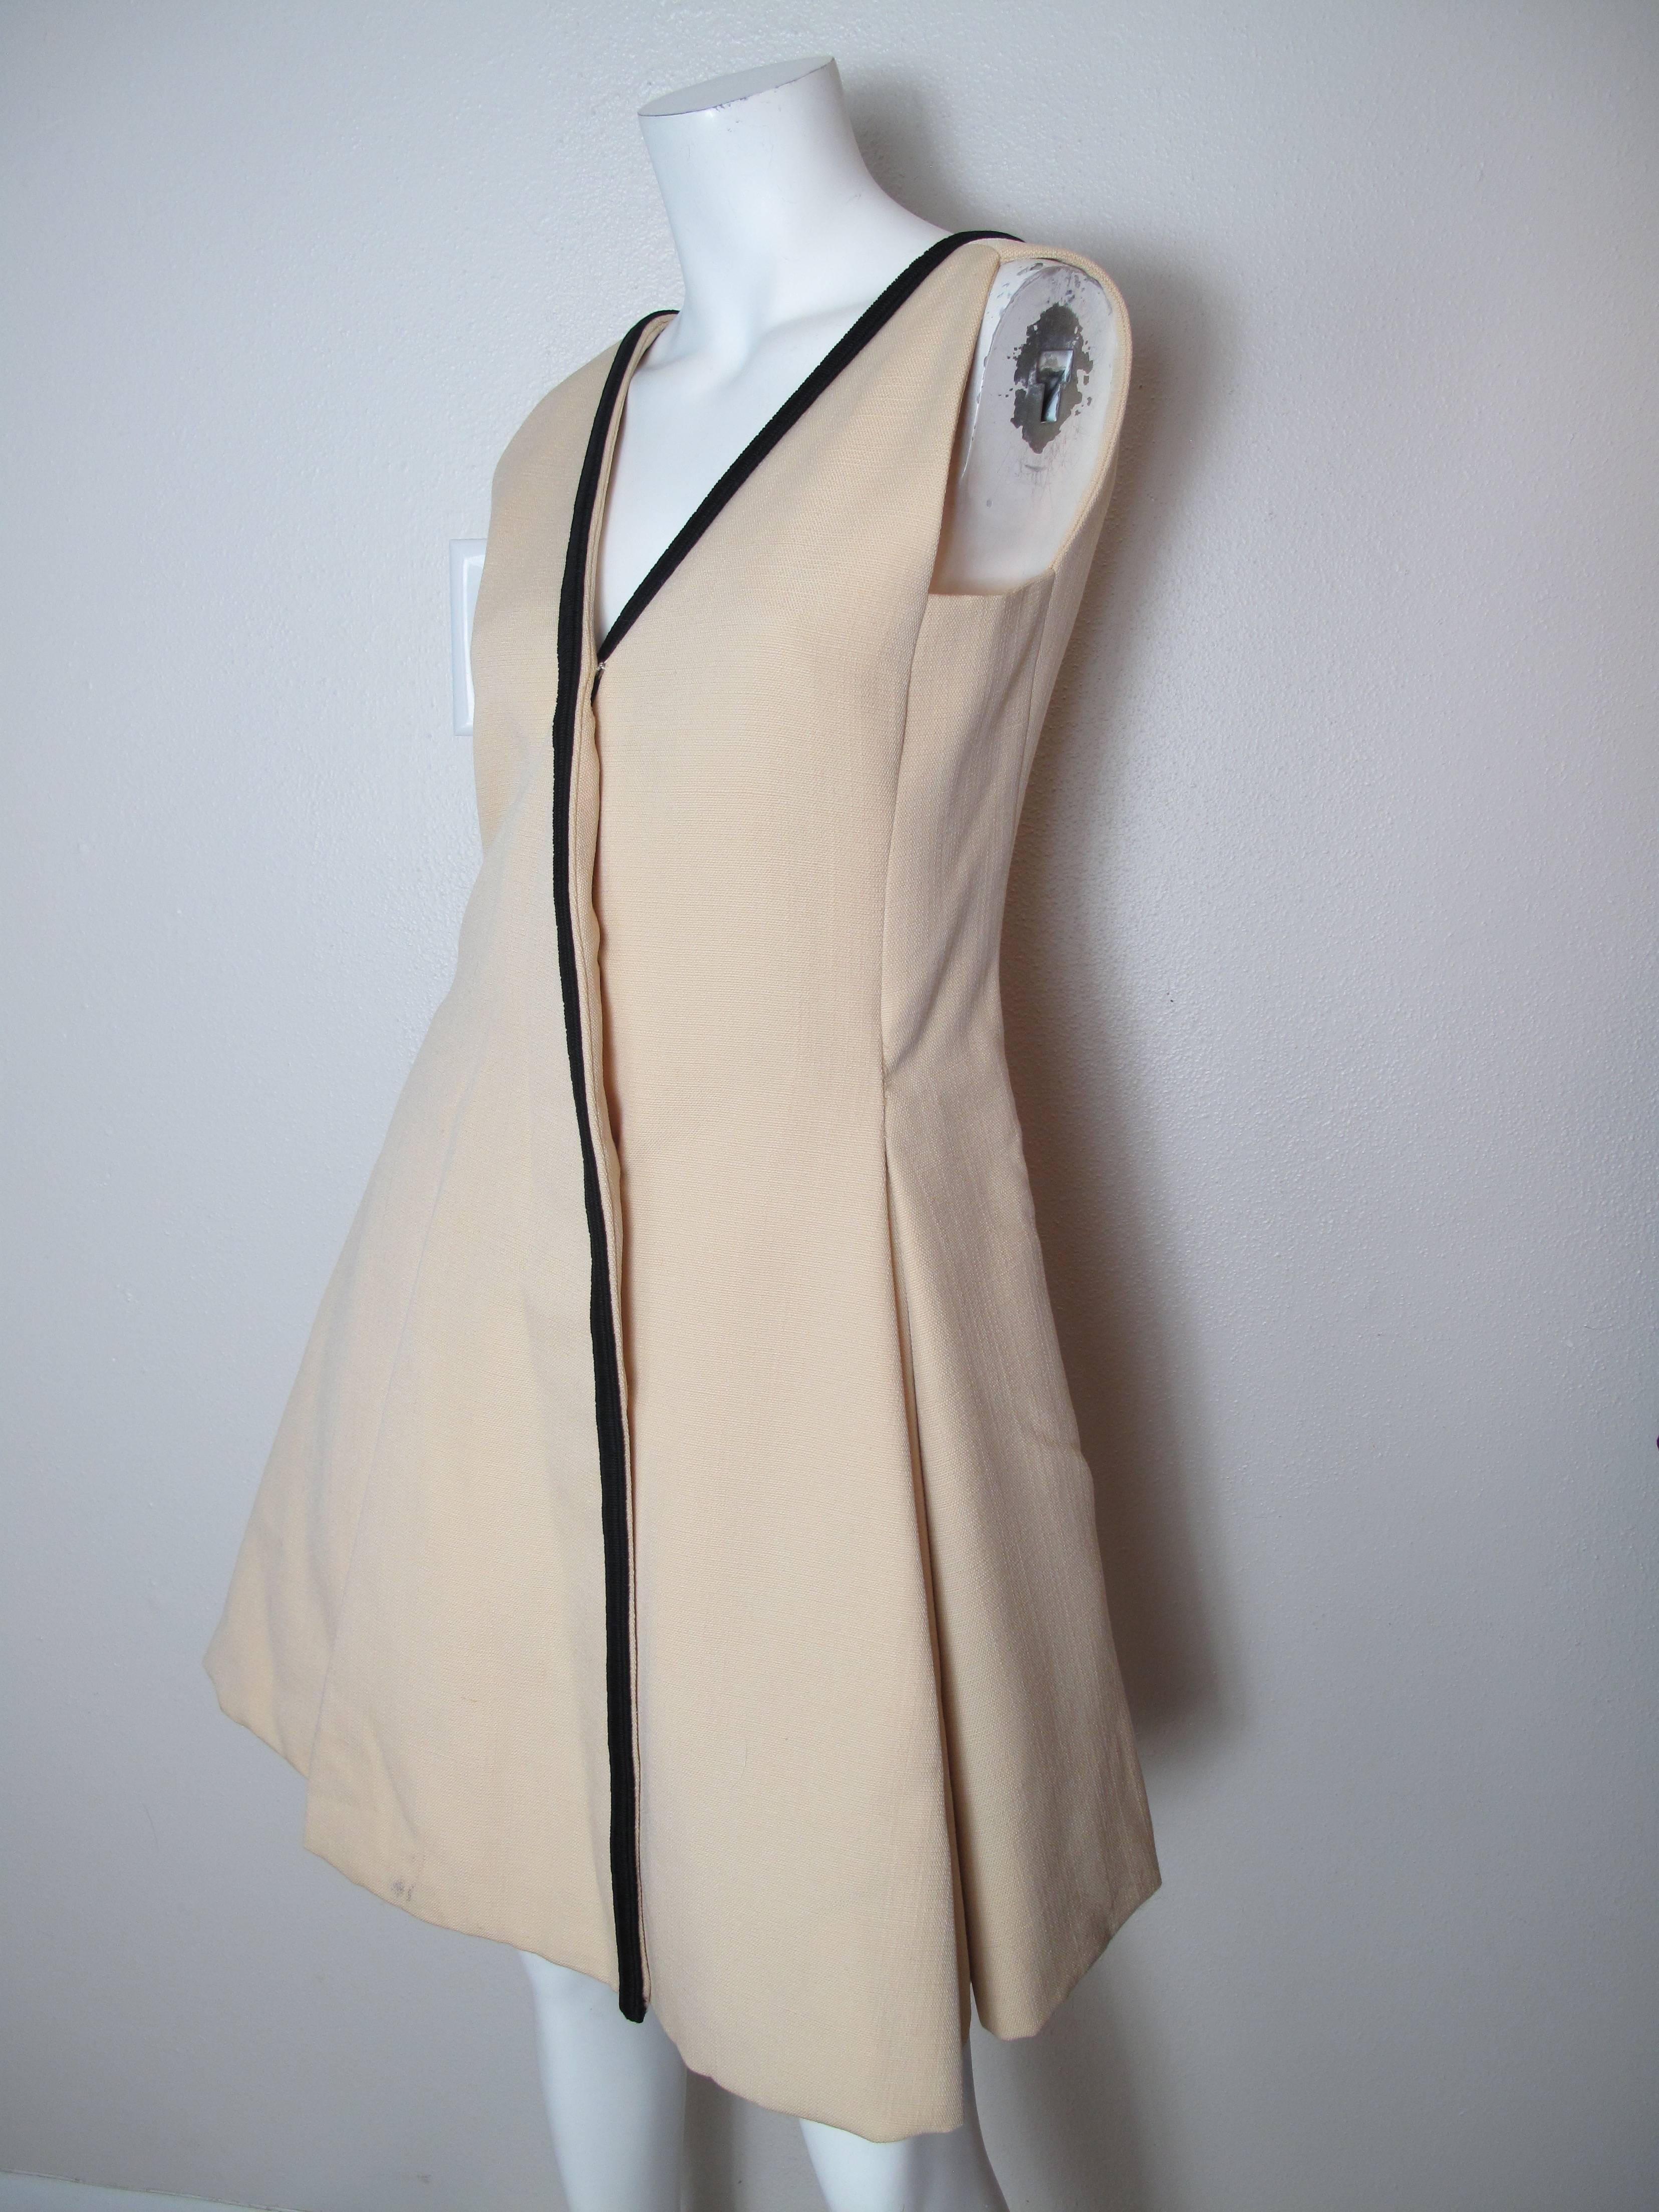 1960s Galanos heavy off white linen dress with black stripe. Condition; As is.  Size 8


We accept returns for refund, please see our terms.  We offer free ground shipping within the US. Let us know if you have any questions. 